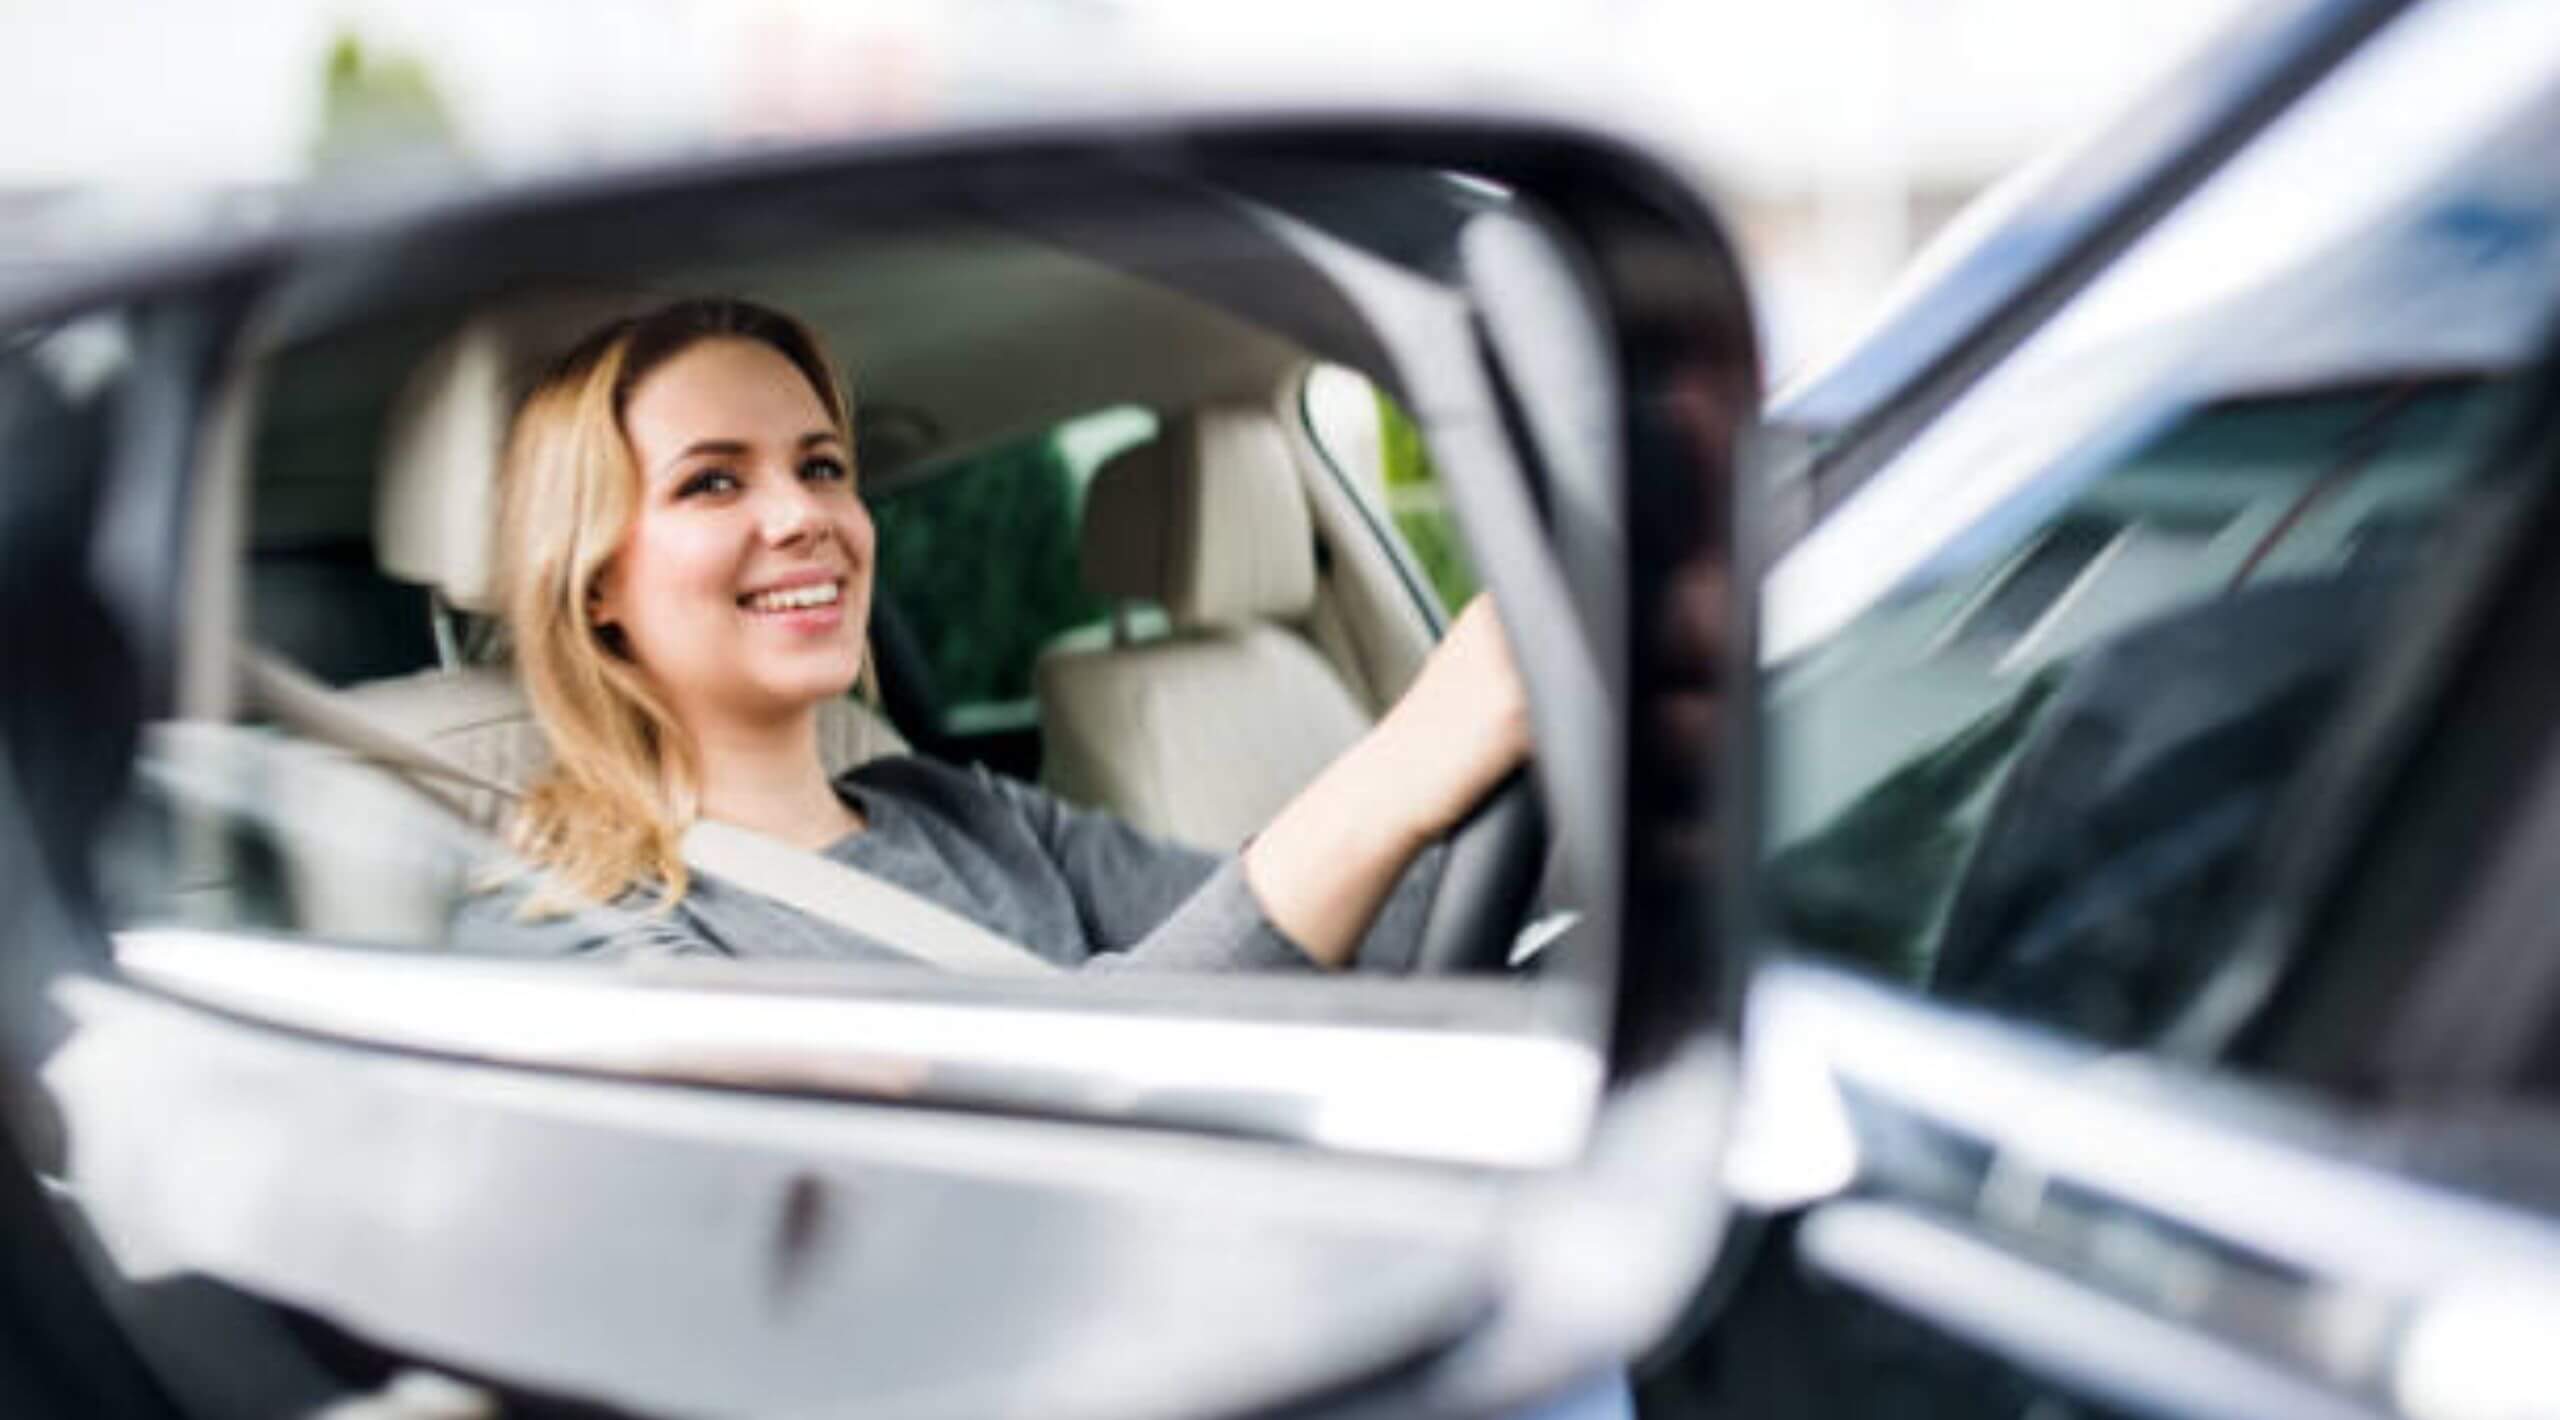 How Often Should You Check Your Mirrors While Driving